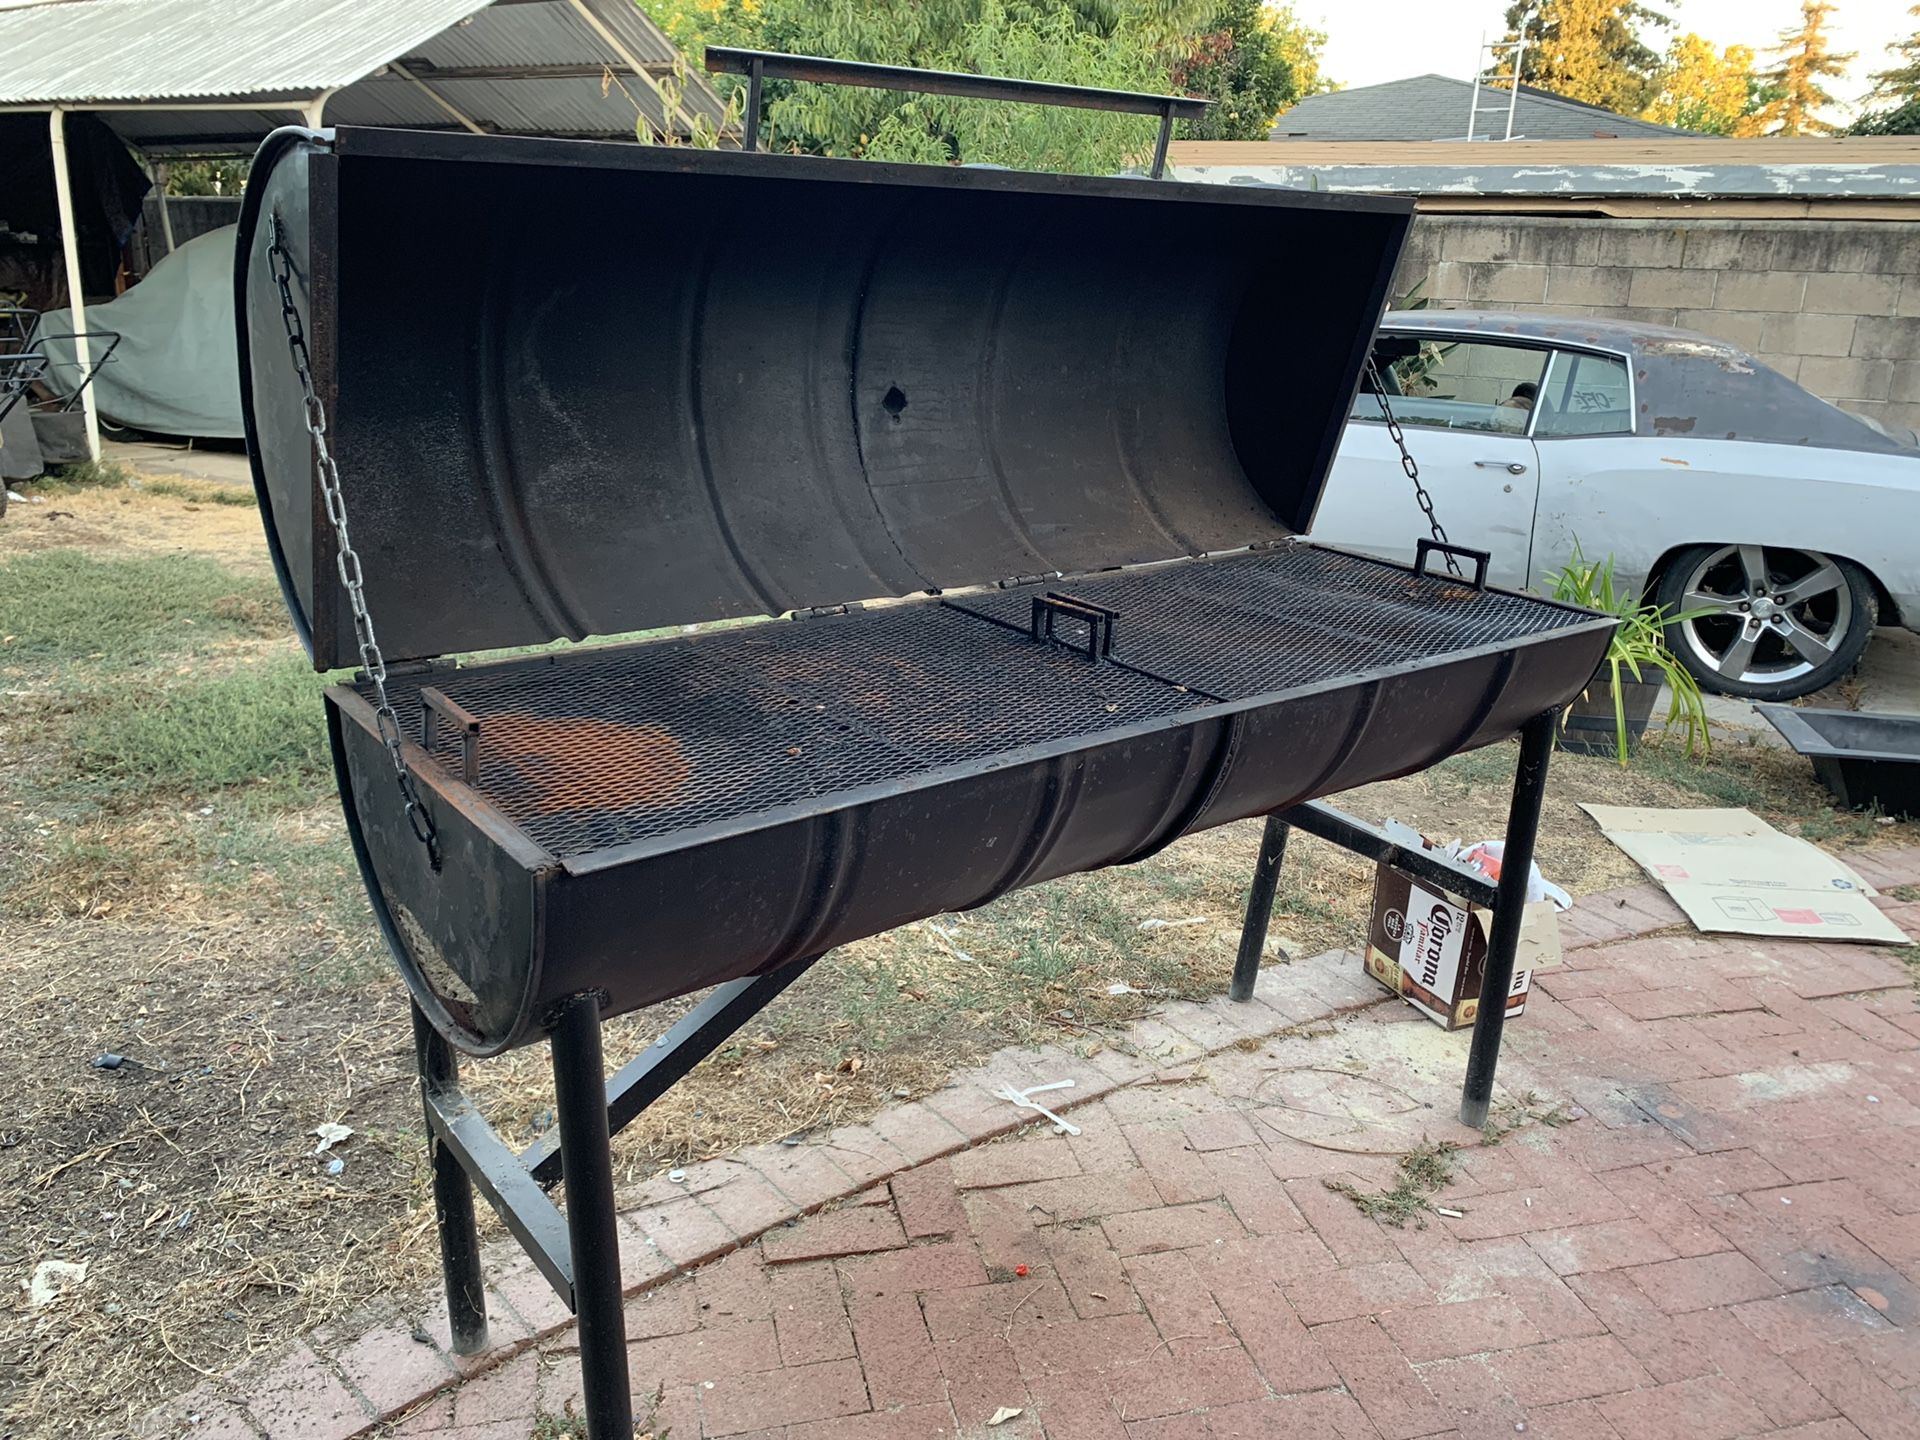 Full charcoal grill